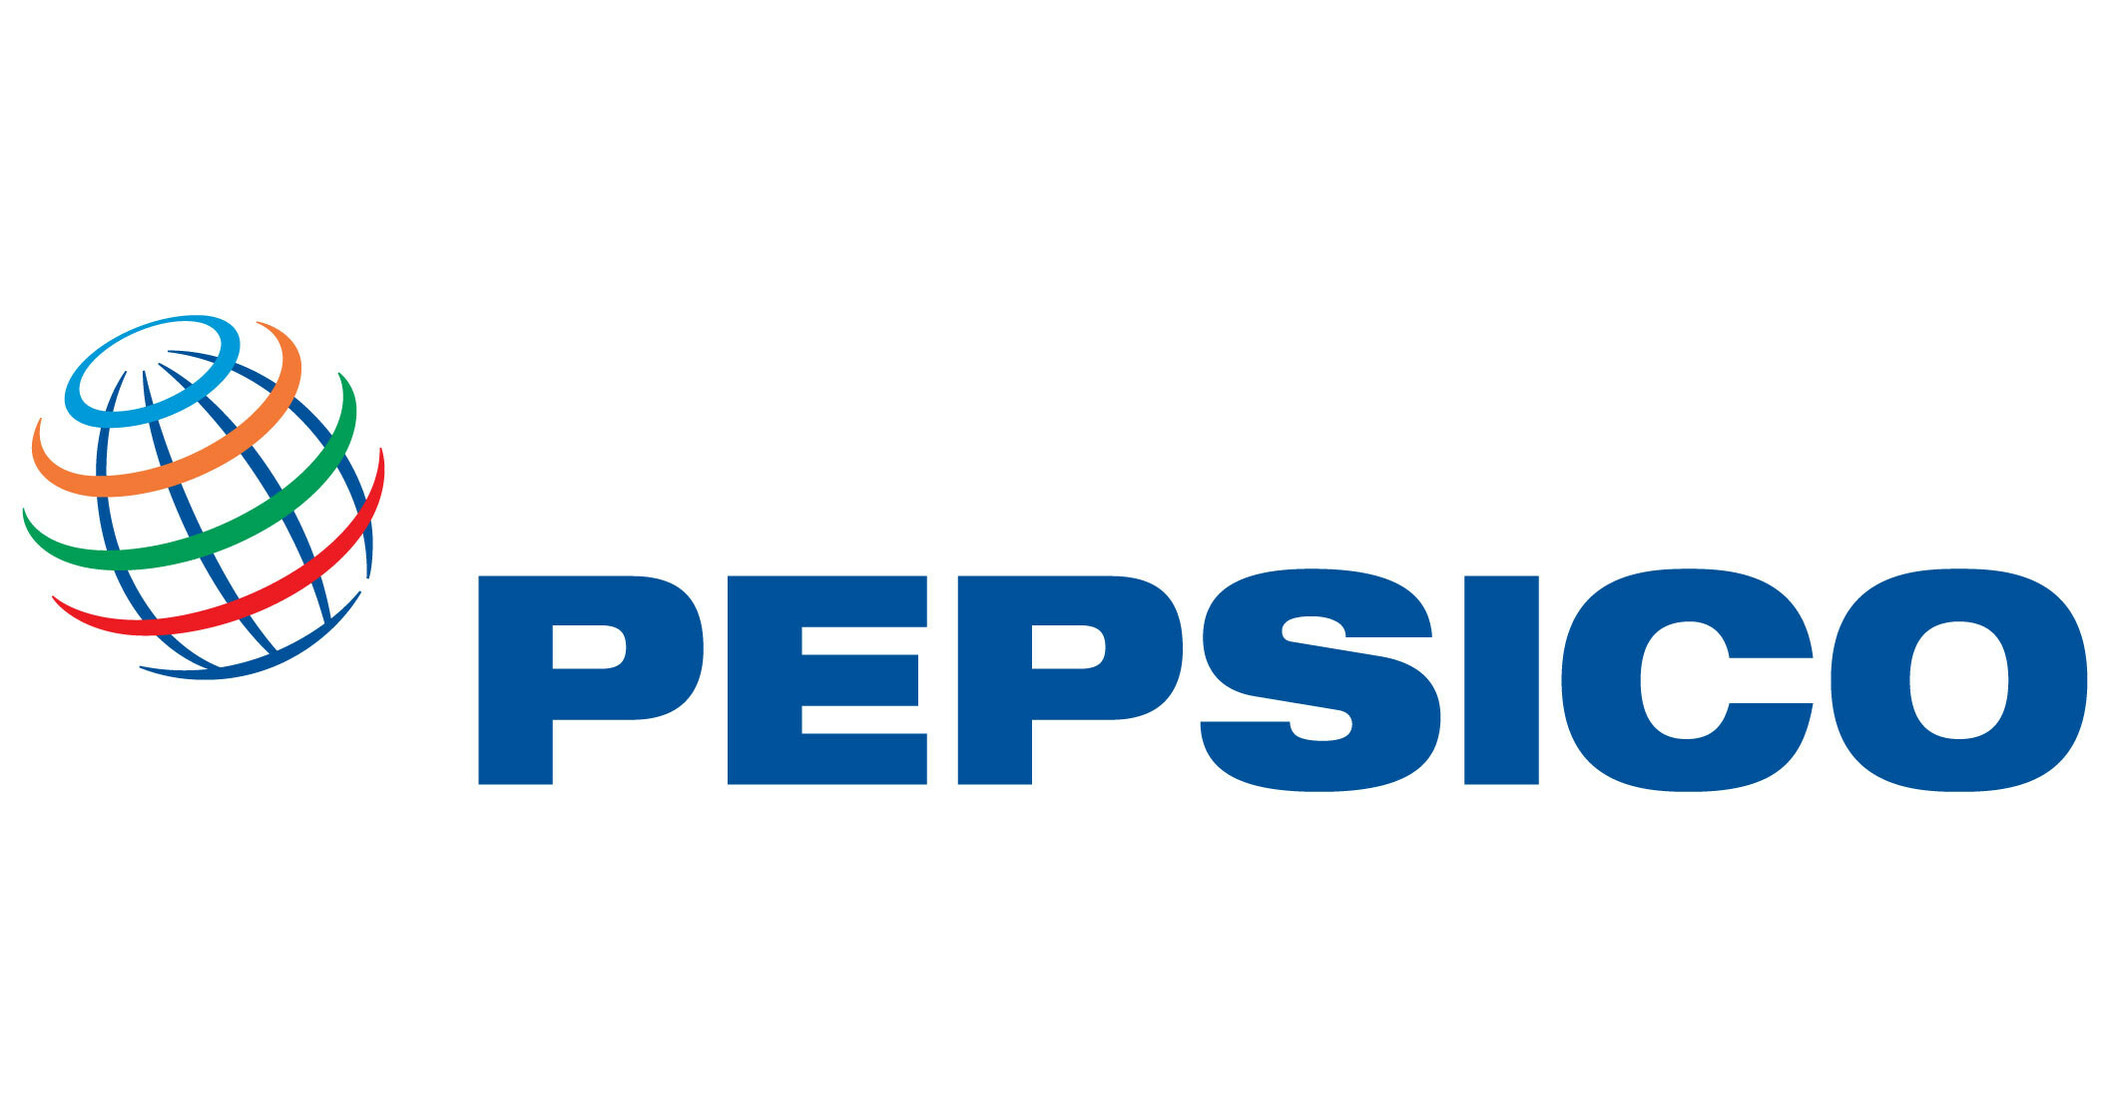 PepsiCo Announces New Chief Financial Officer; Long-Standing CFO to Leave For Role at Disney